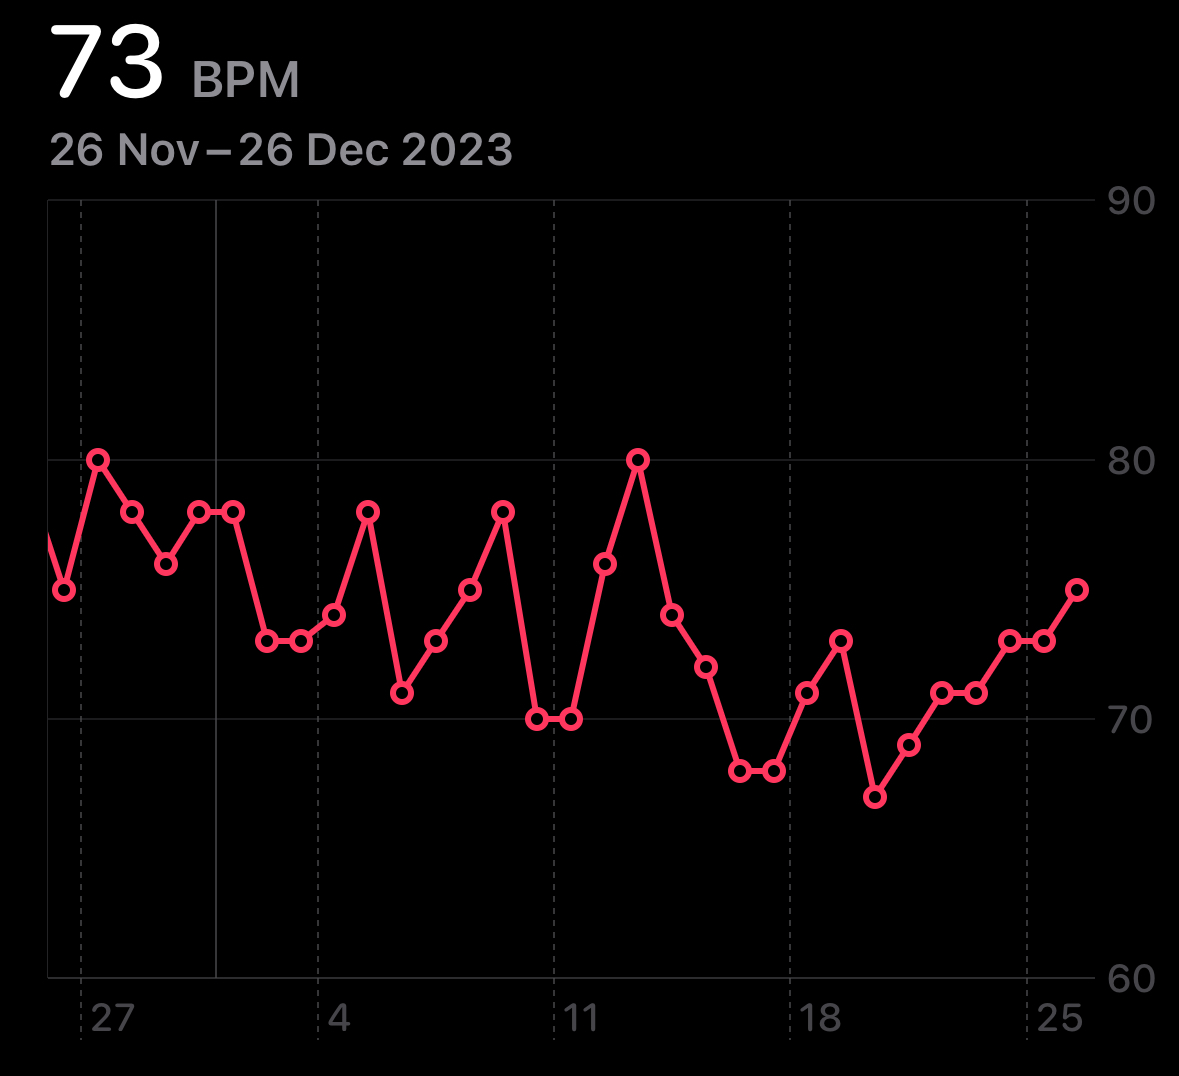 An average heartrate graph from 27th November to 26th December. It is decreasing slowly from 79 to 70.